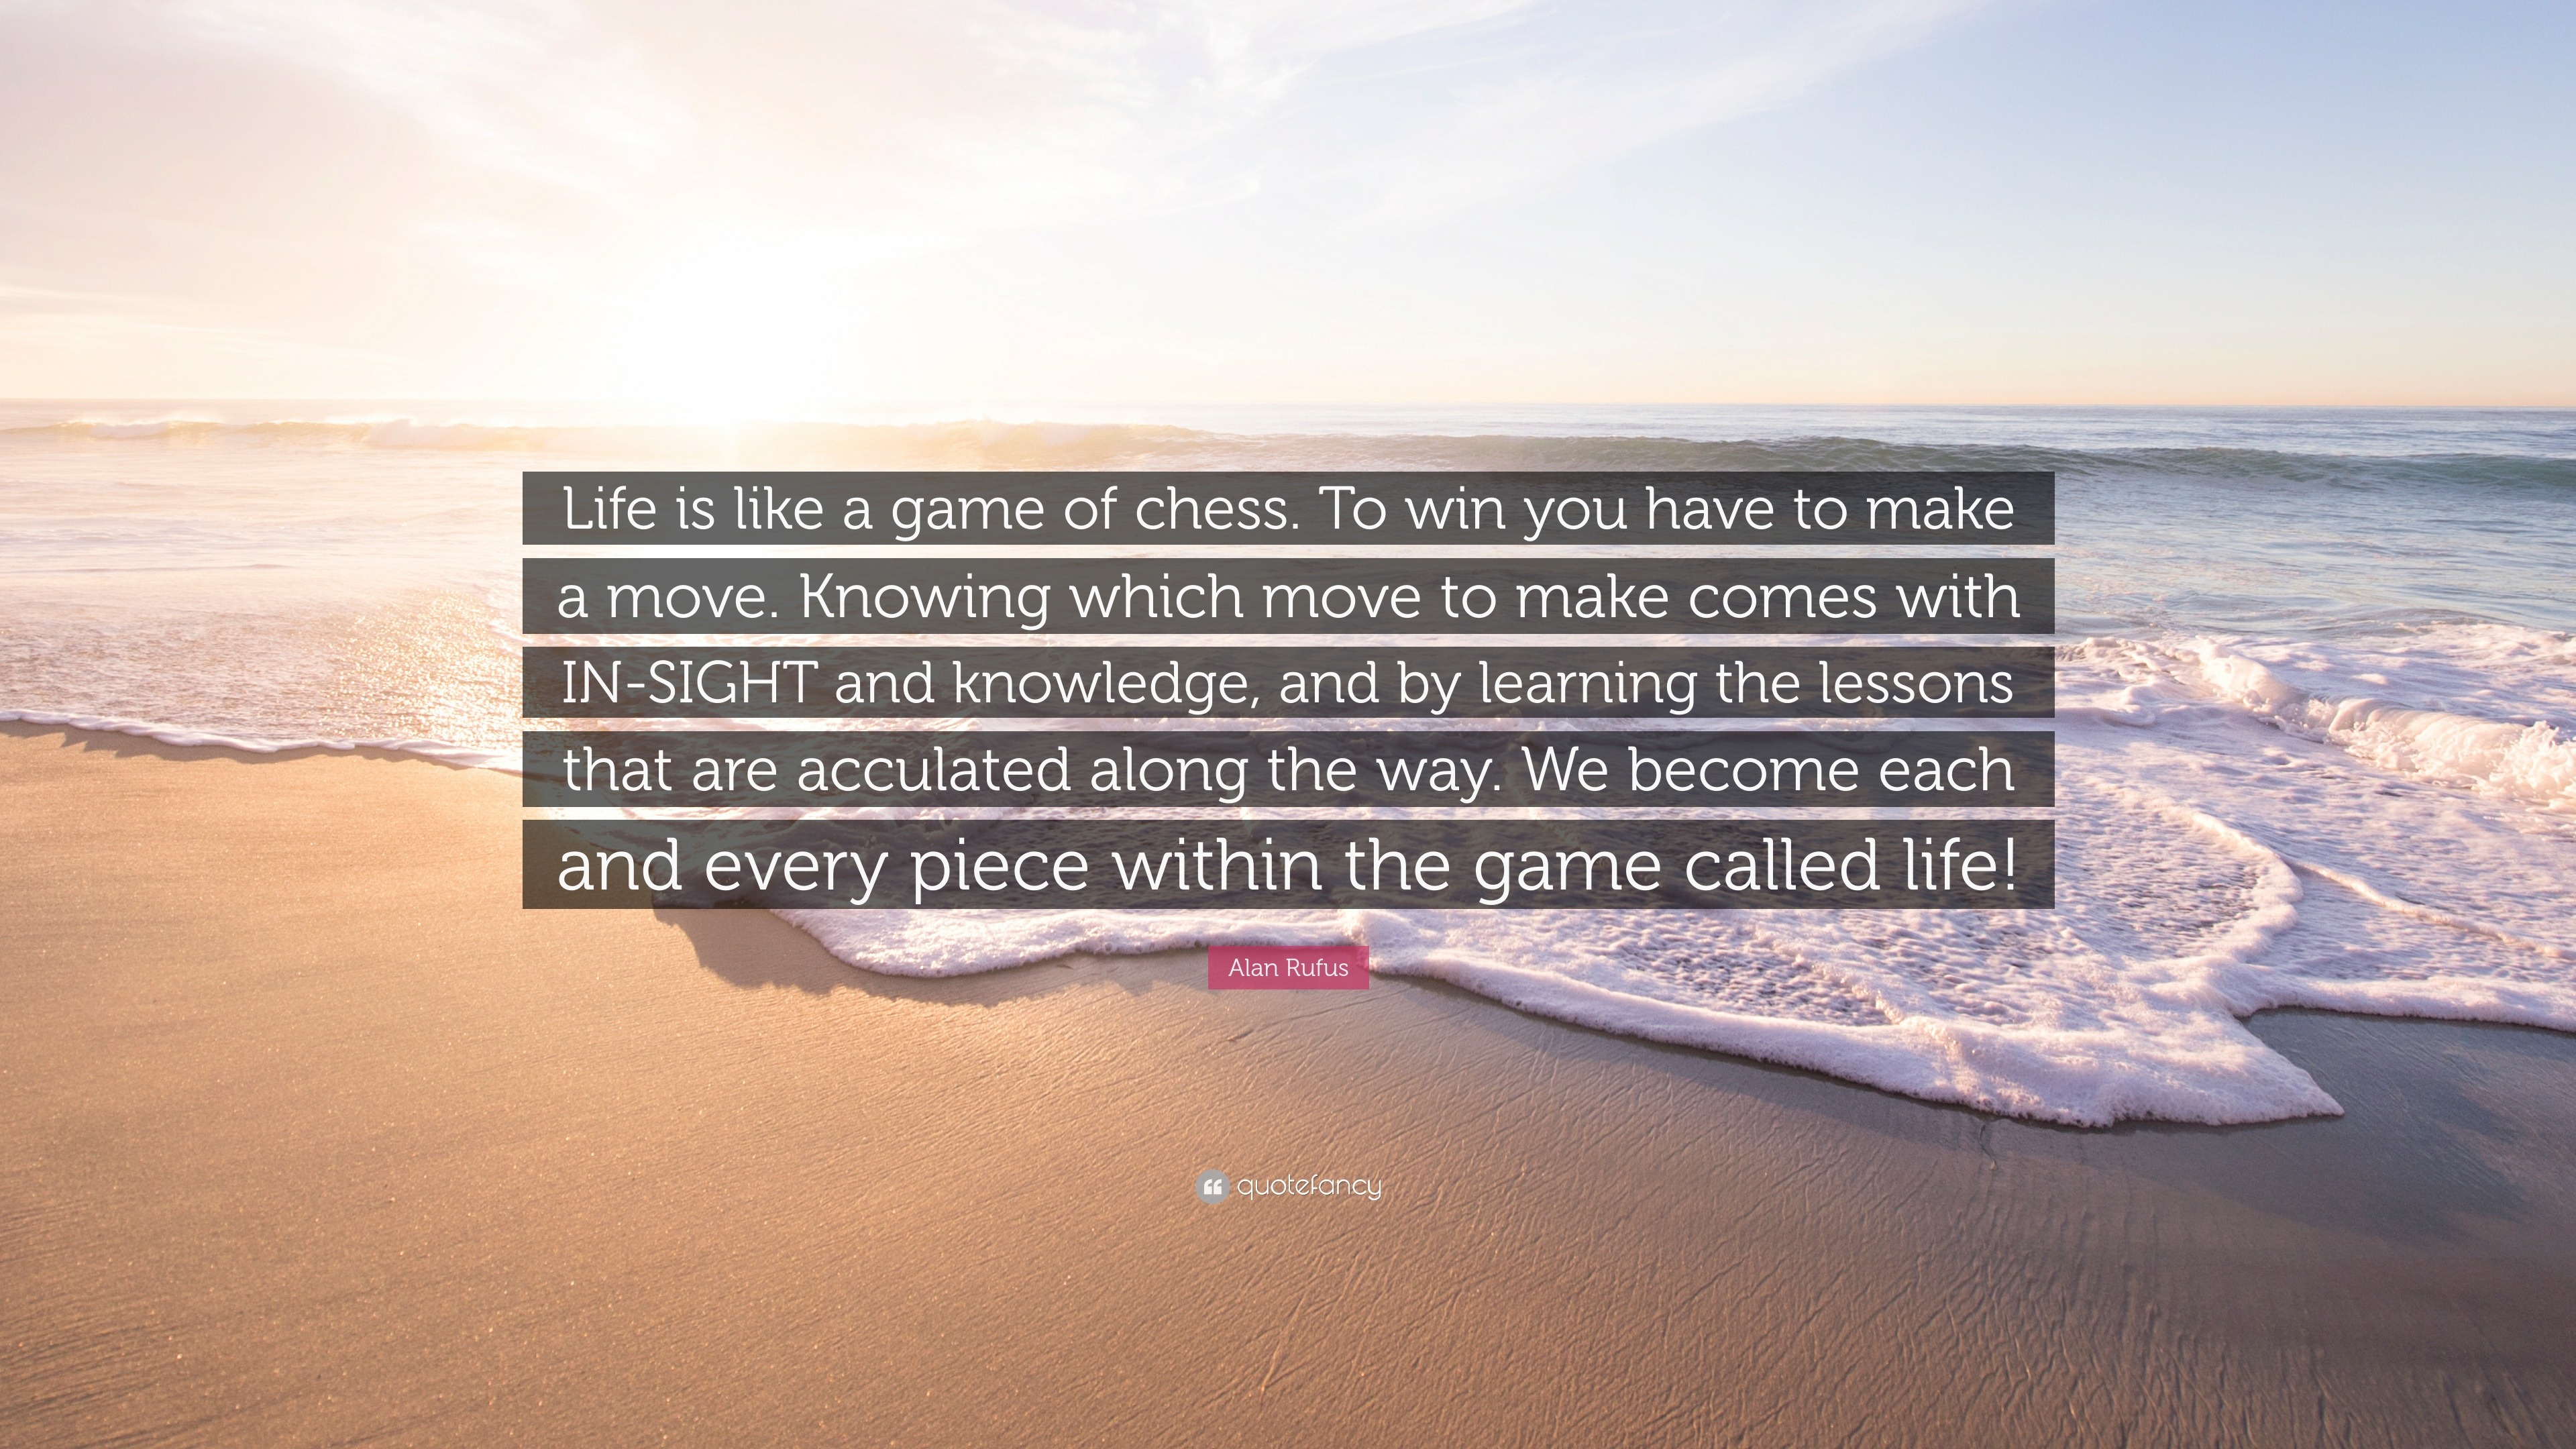 gush.life - Life and Chess! #life #game #chess #unpredictable #moves  #winner #quotes #quoteoftheday #writingcommunity #writing #blog #blogspot  #writinglife #fight #lifetime #heartoffeelings #relationshipquotes  #quotestoliveby #lifelessons #instawriters